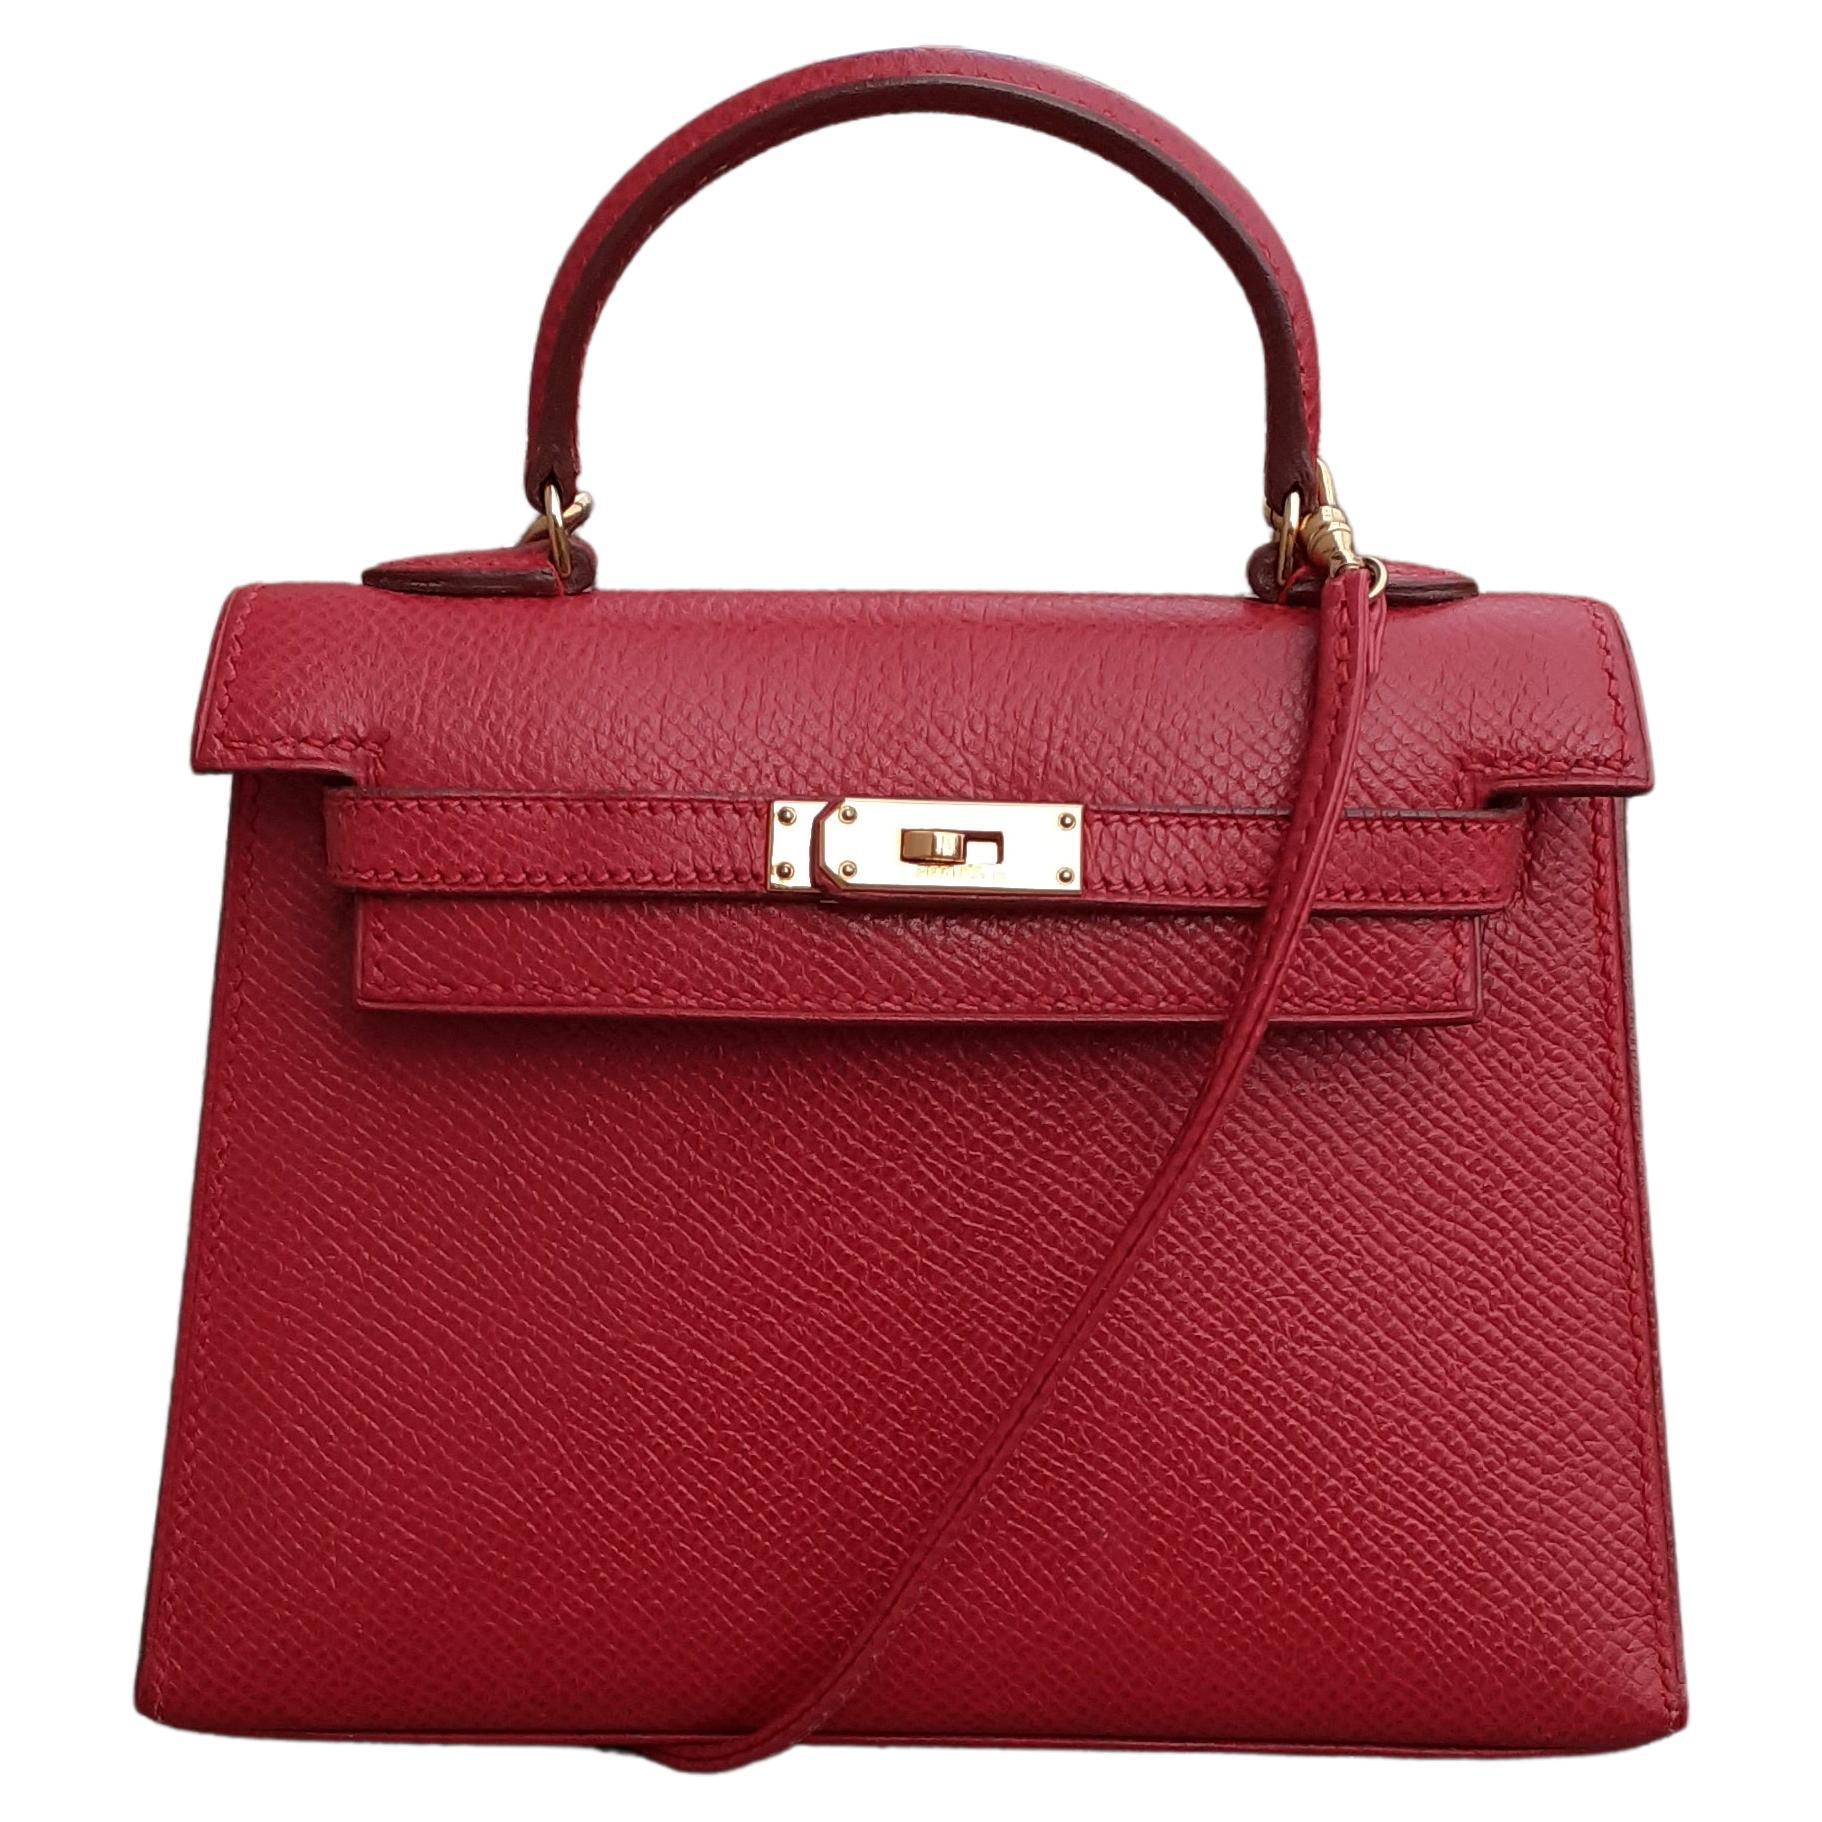 Exceptional Hermès Vintage Micro Kelly 15 cm Sellier Bag Red Leather Gold Hdw